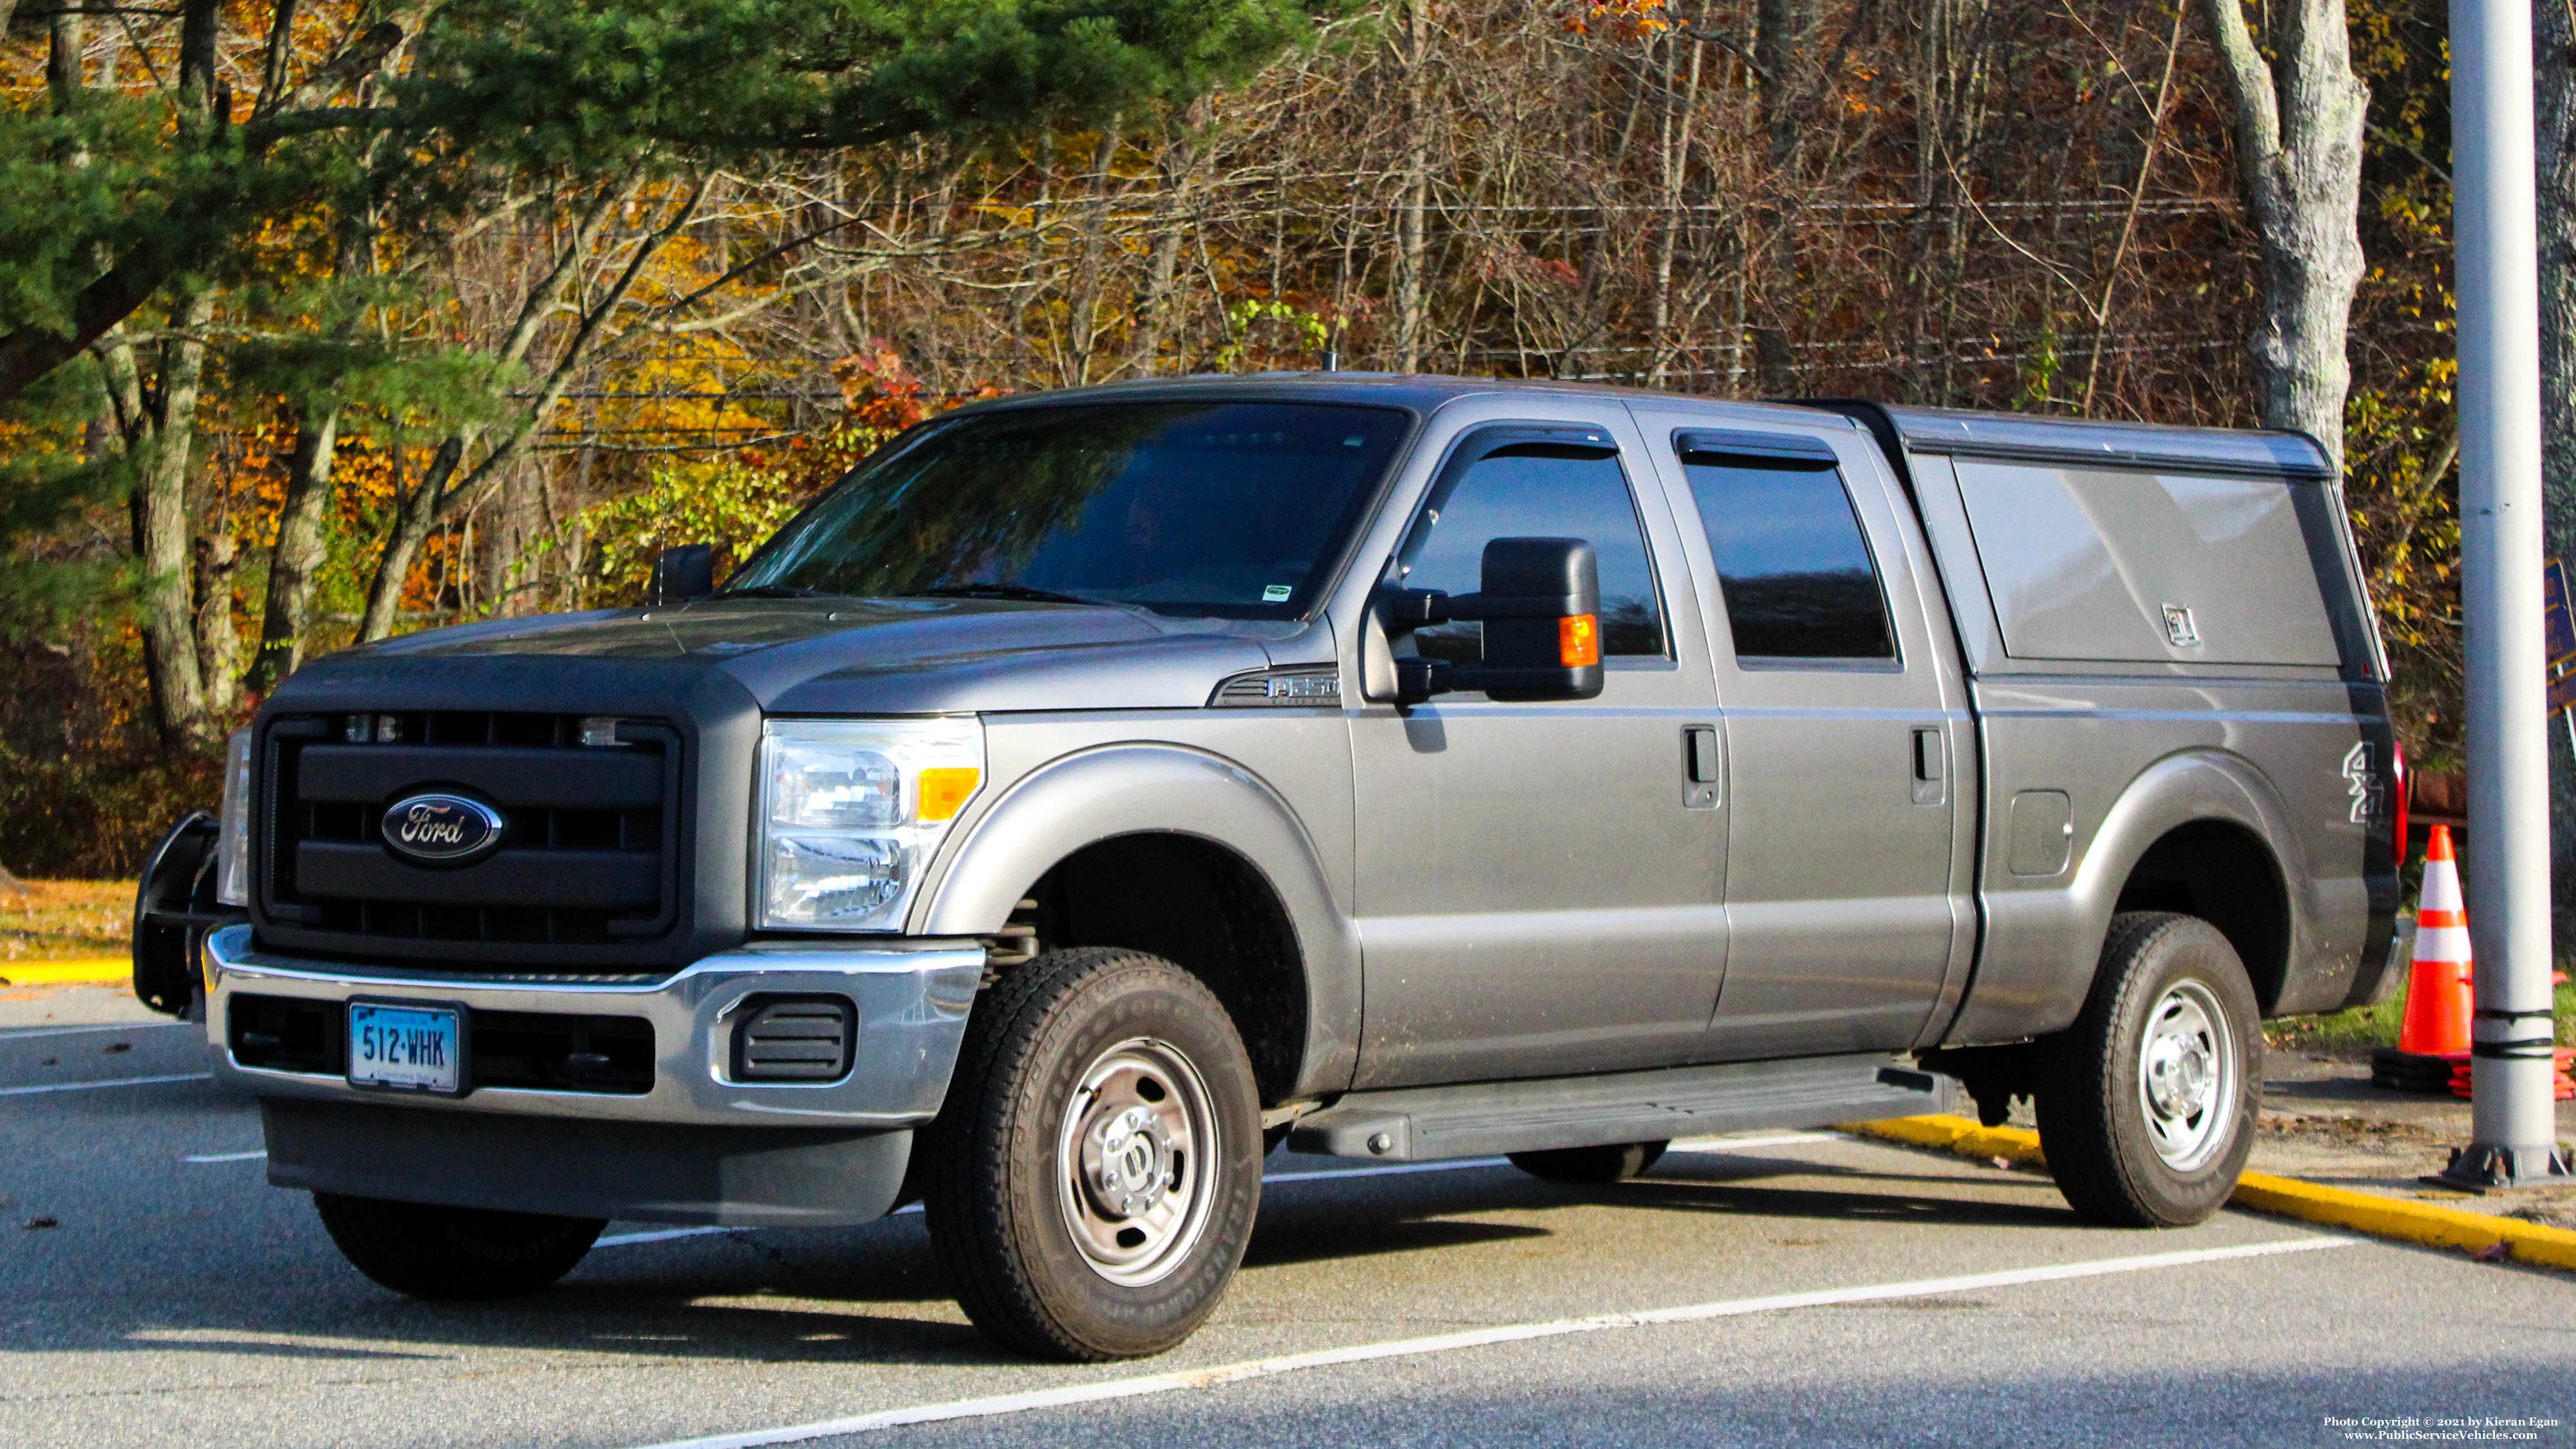 A photo  of Connecticut State Police
            Cruiser 512, a 2011-2014 Ford F-550 Crew Cab             taken by Kieran Egan